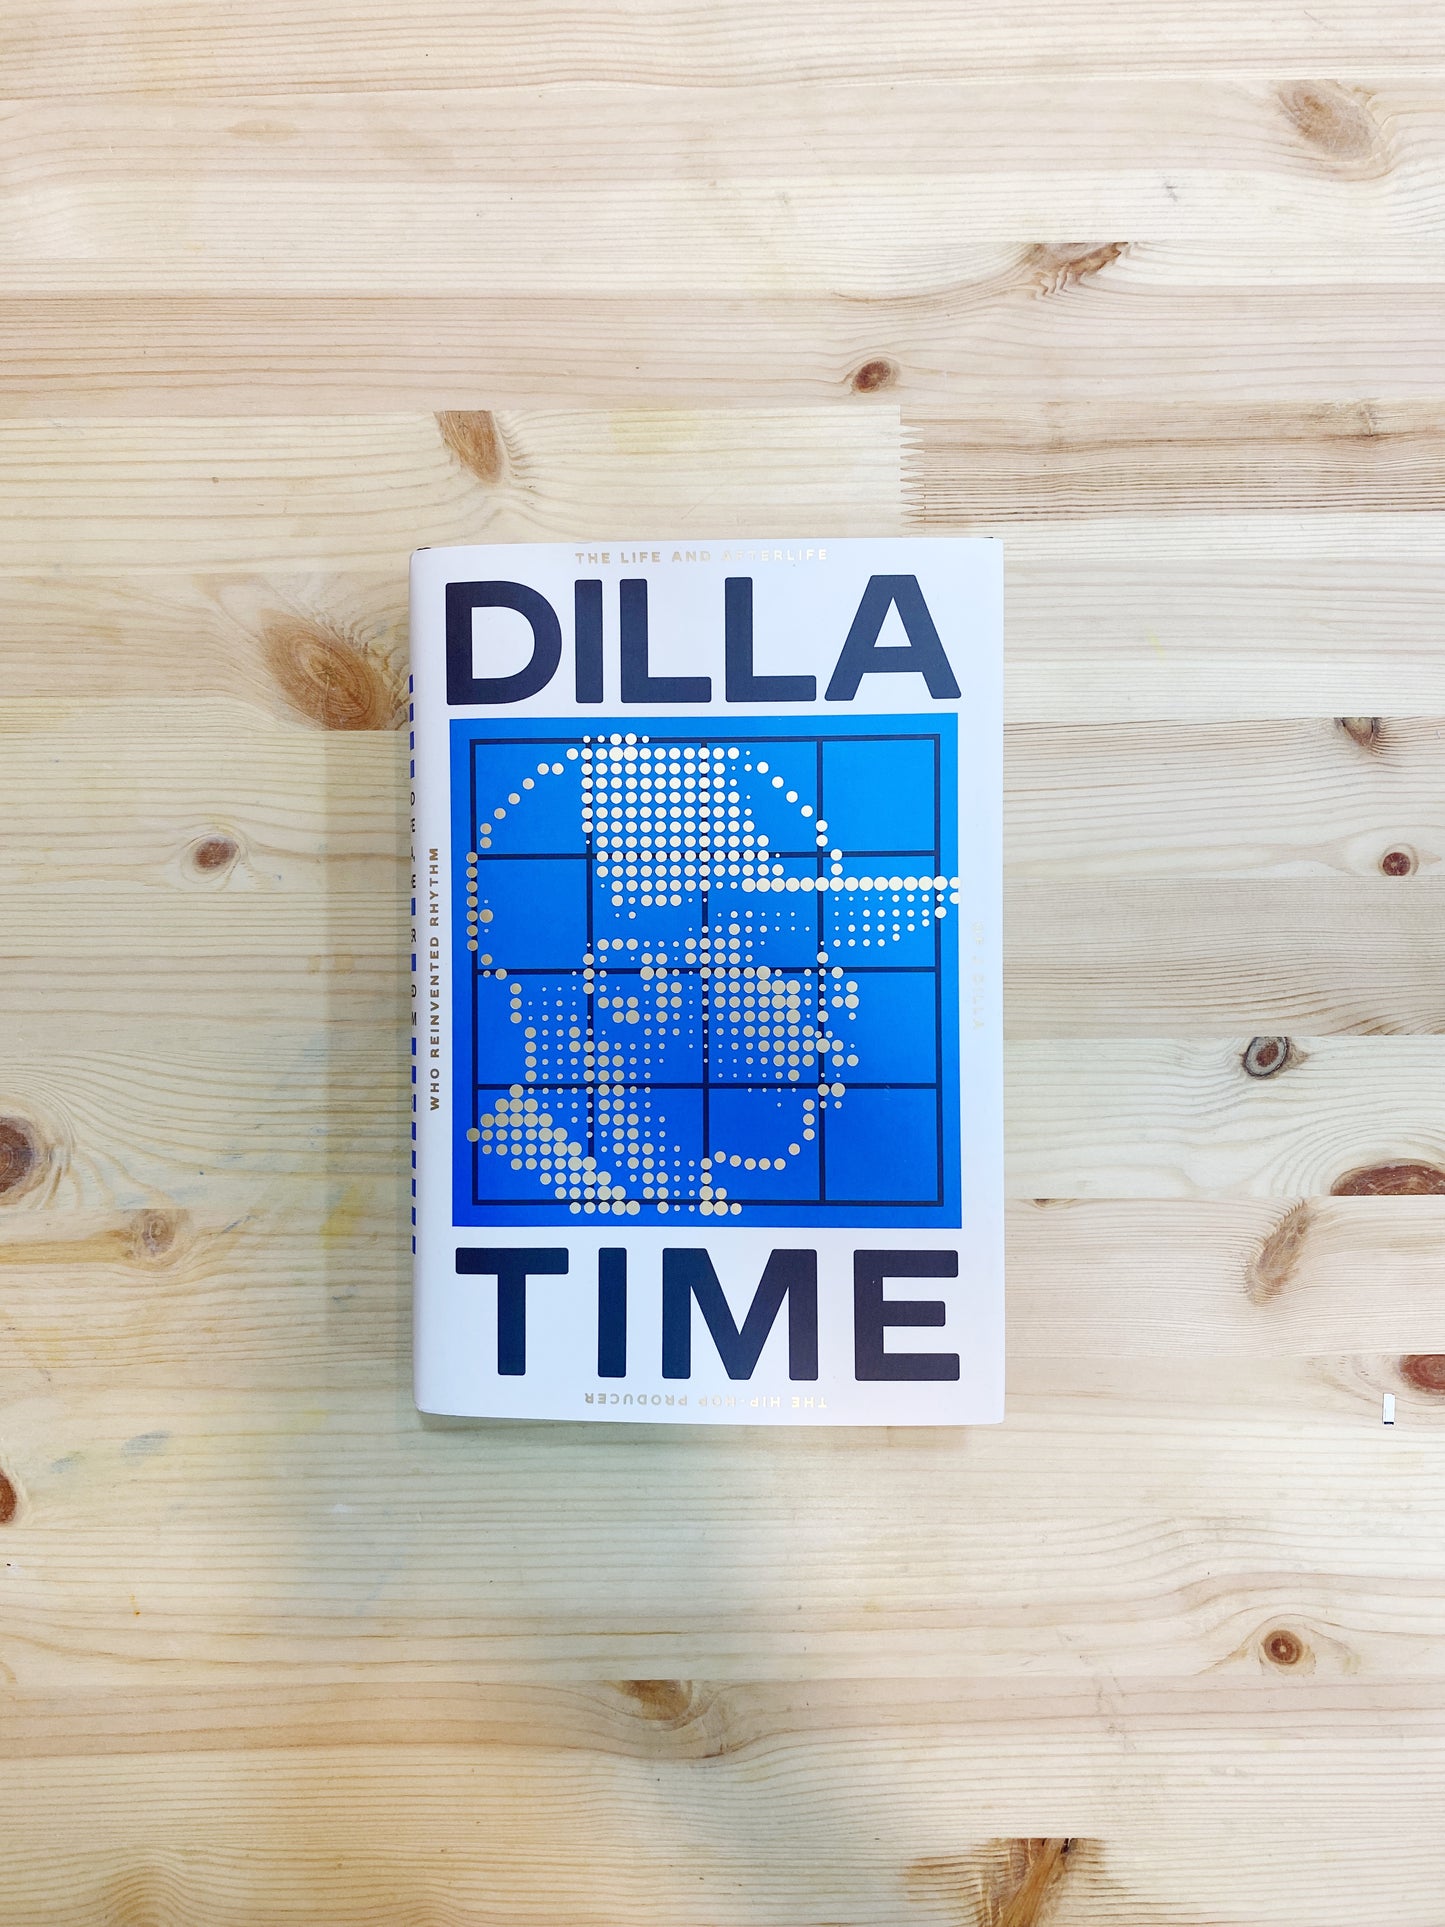 Dan Charnas  - Dilla Time: The Life and Afterlife of J Dilla, the Hip-Hop Producer Who Reinvented Rhythm